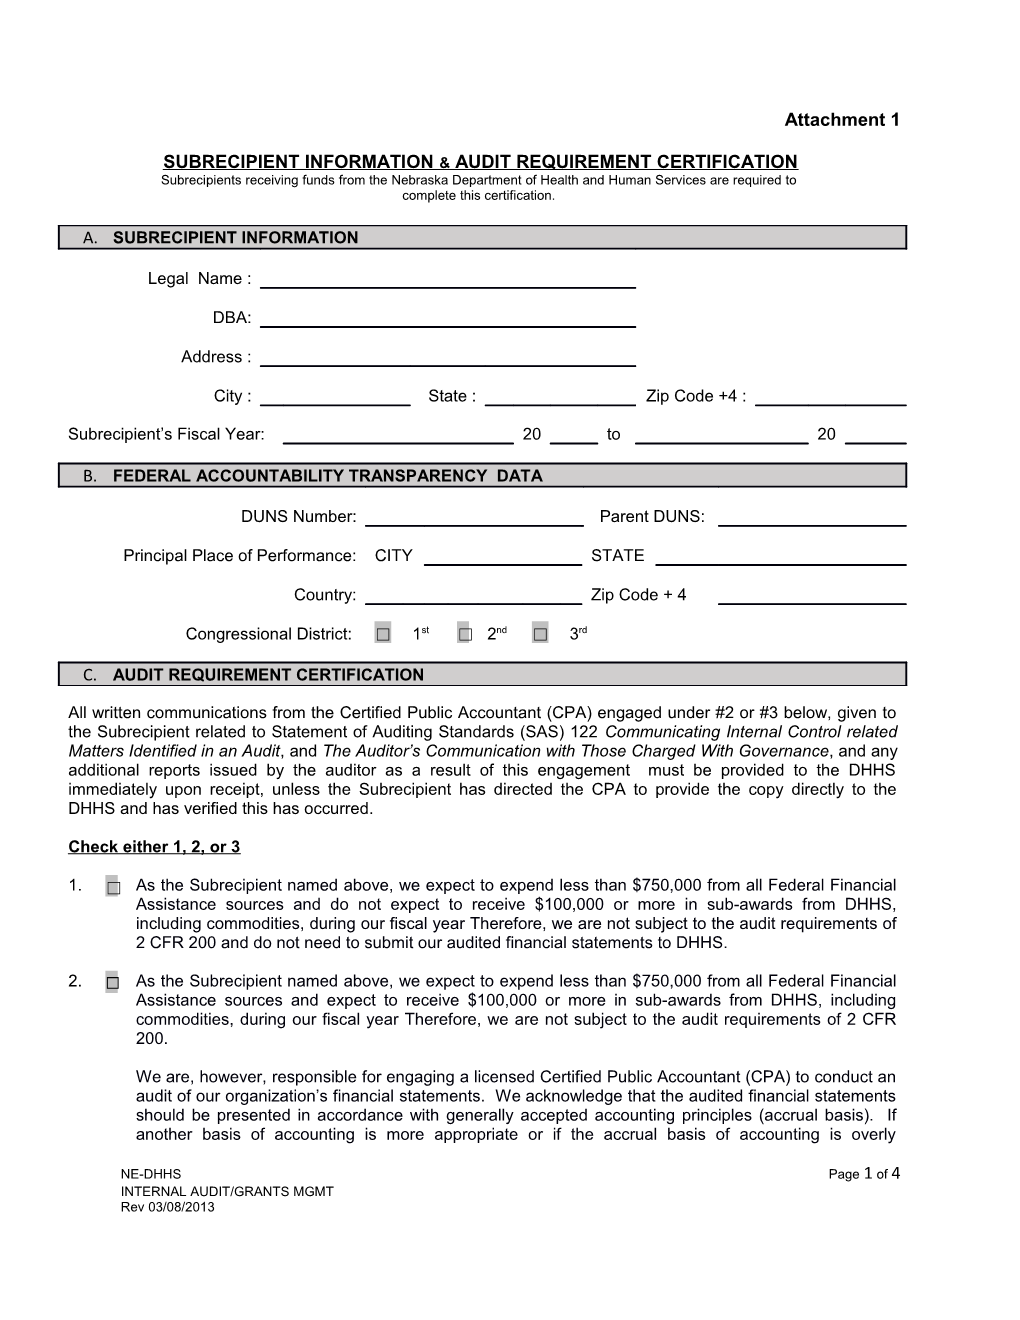 Subrecipient Information and Audit Requirement Certification Form